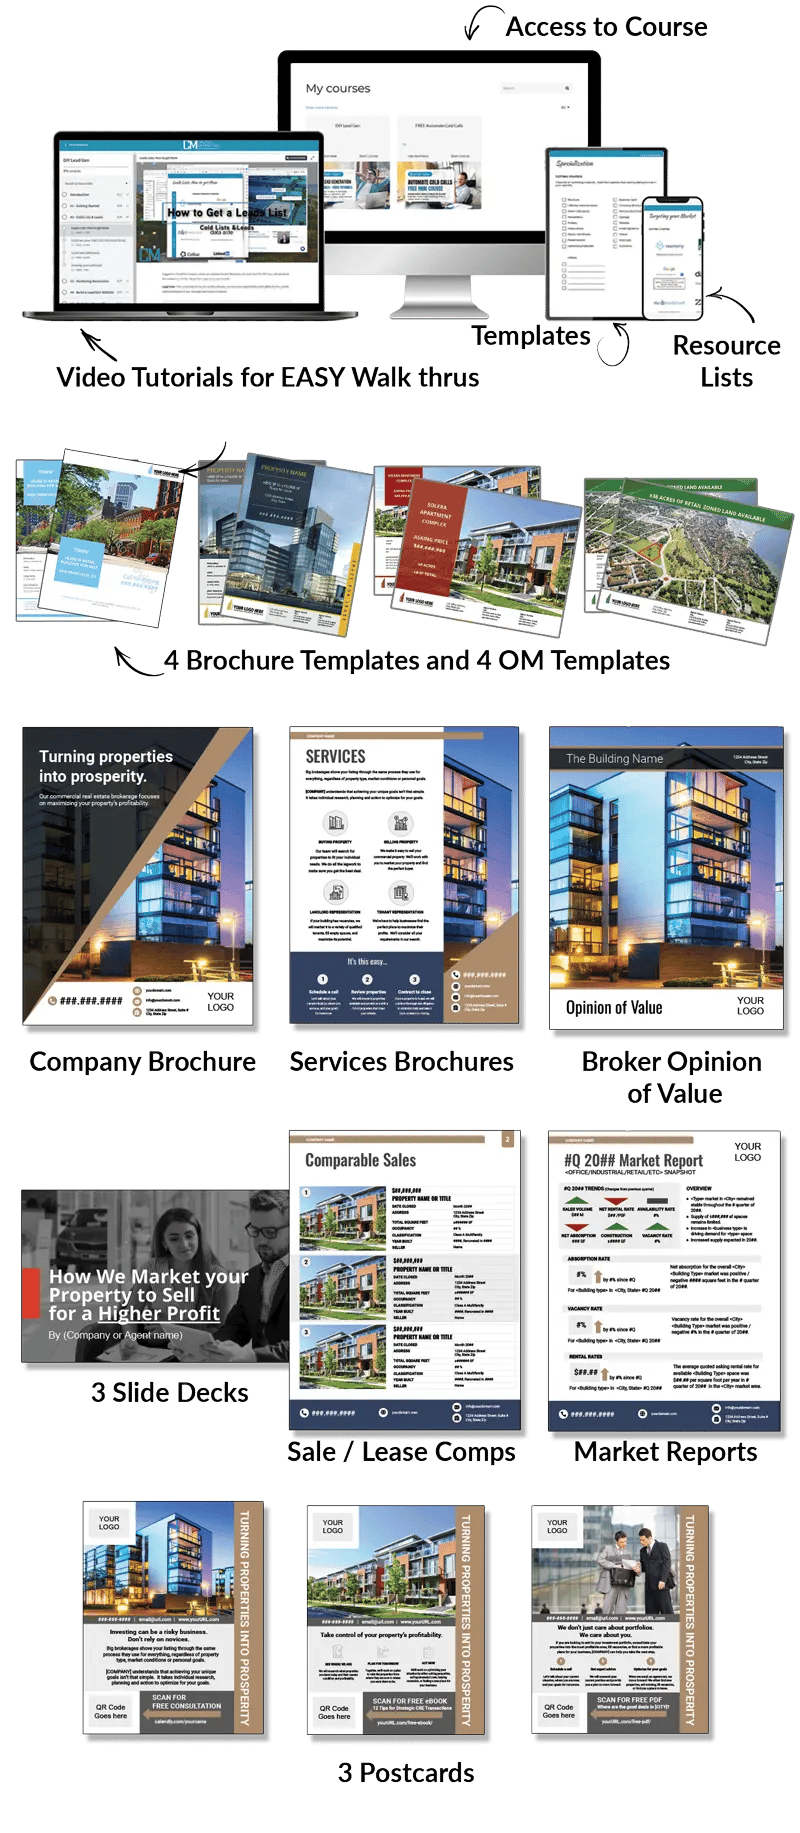 Mockup of materials included in the Branding Hero Package. Shows the video tutorials, 4 listing brochures, 4 offering memorandums, broker opinion of value, company brochure postcards, and more.